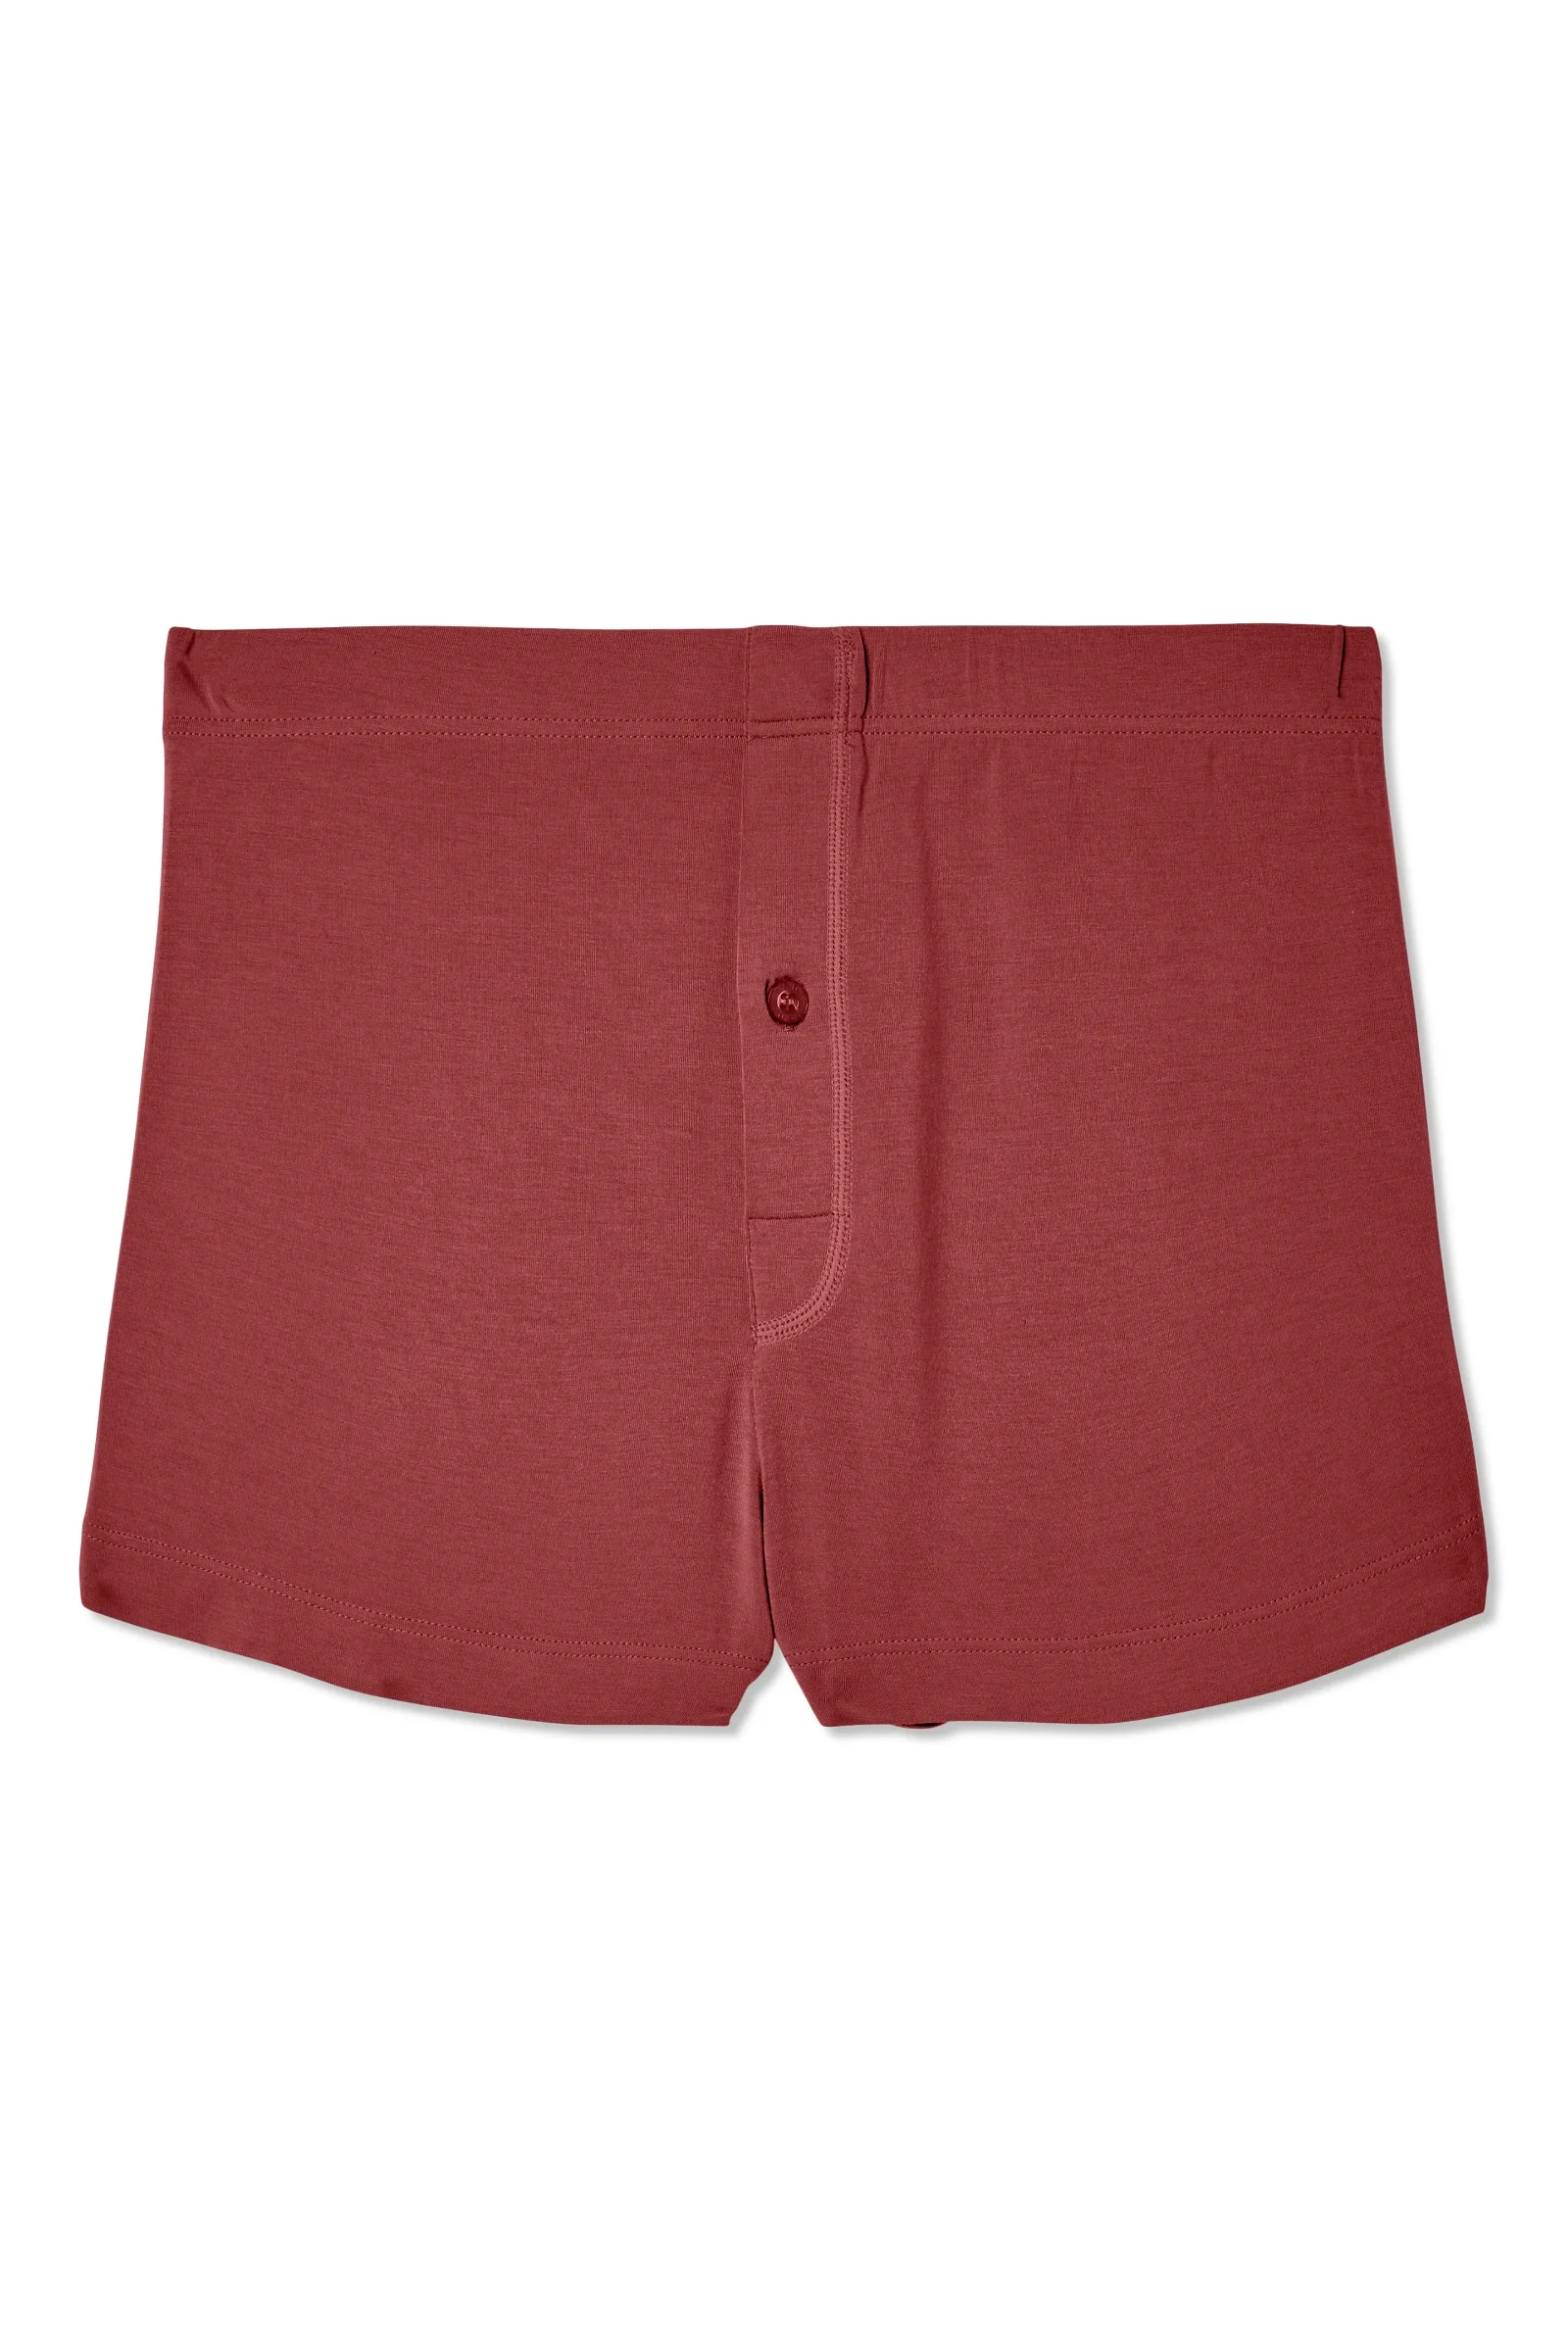 Image of SilkCut Slim Boxers with Button Fly